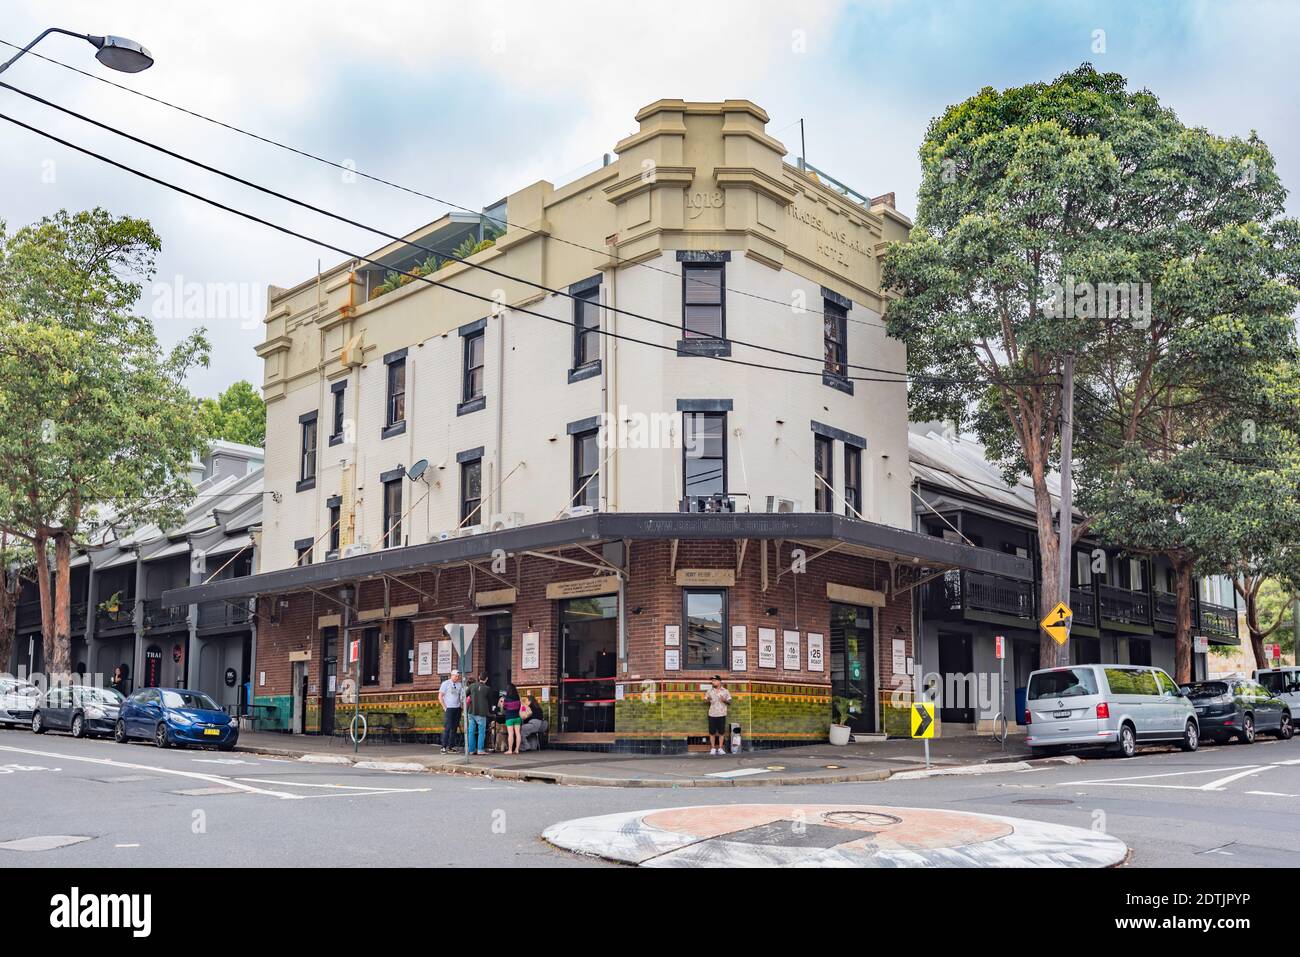 The Tradesmans' Arms Hotel is a Federation Free Classical design by Architects Copeman and Lemont and was built in Darlinghurst, Sydney in 1917 Stock Photo